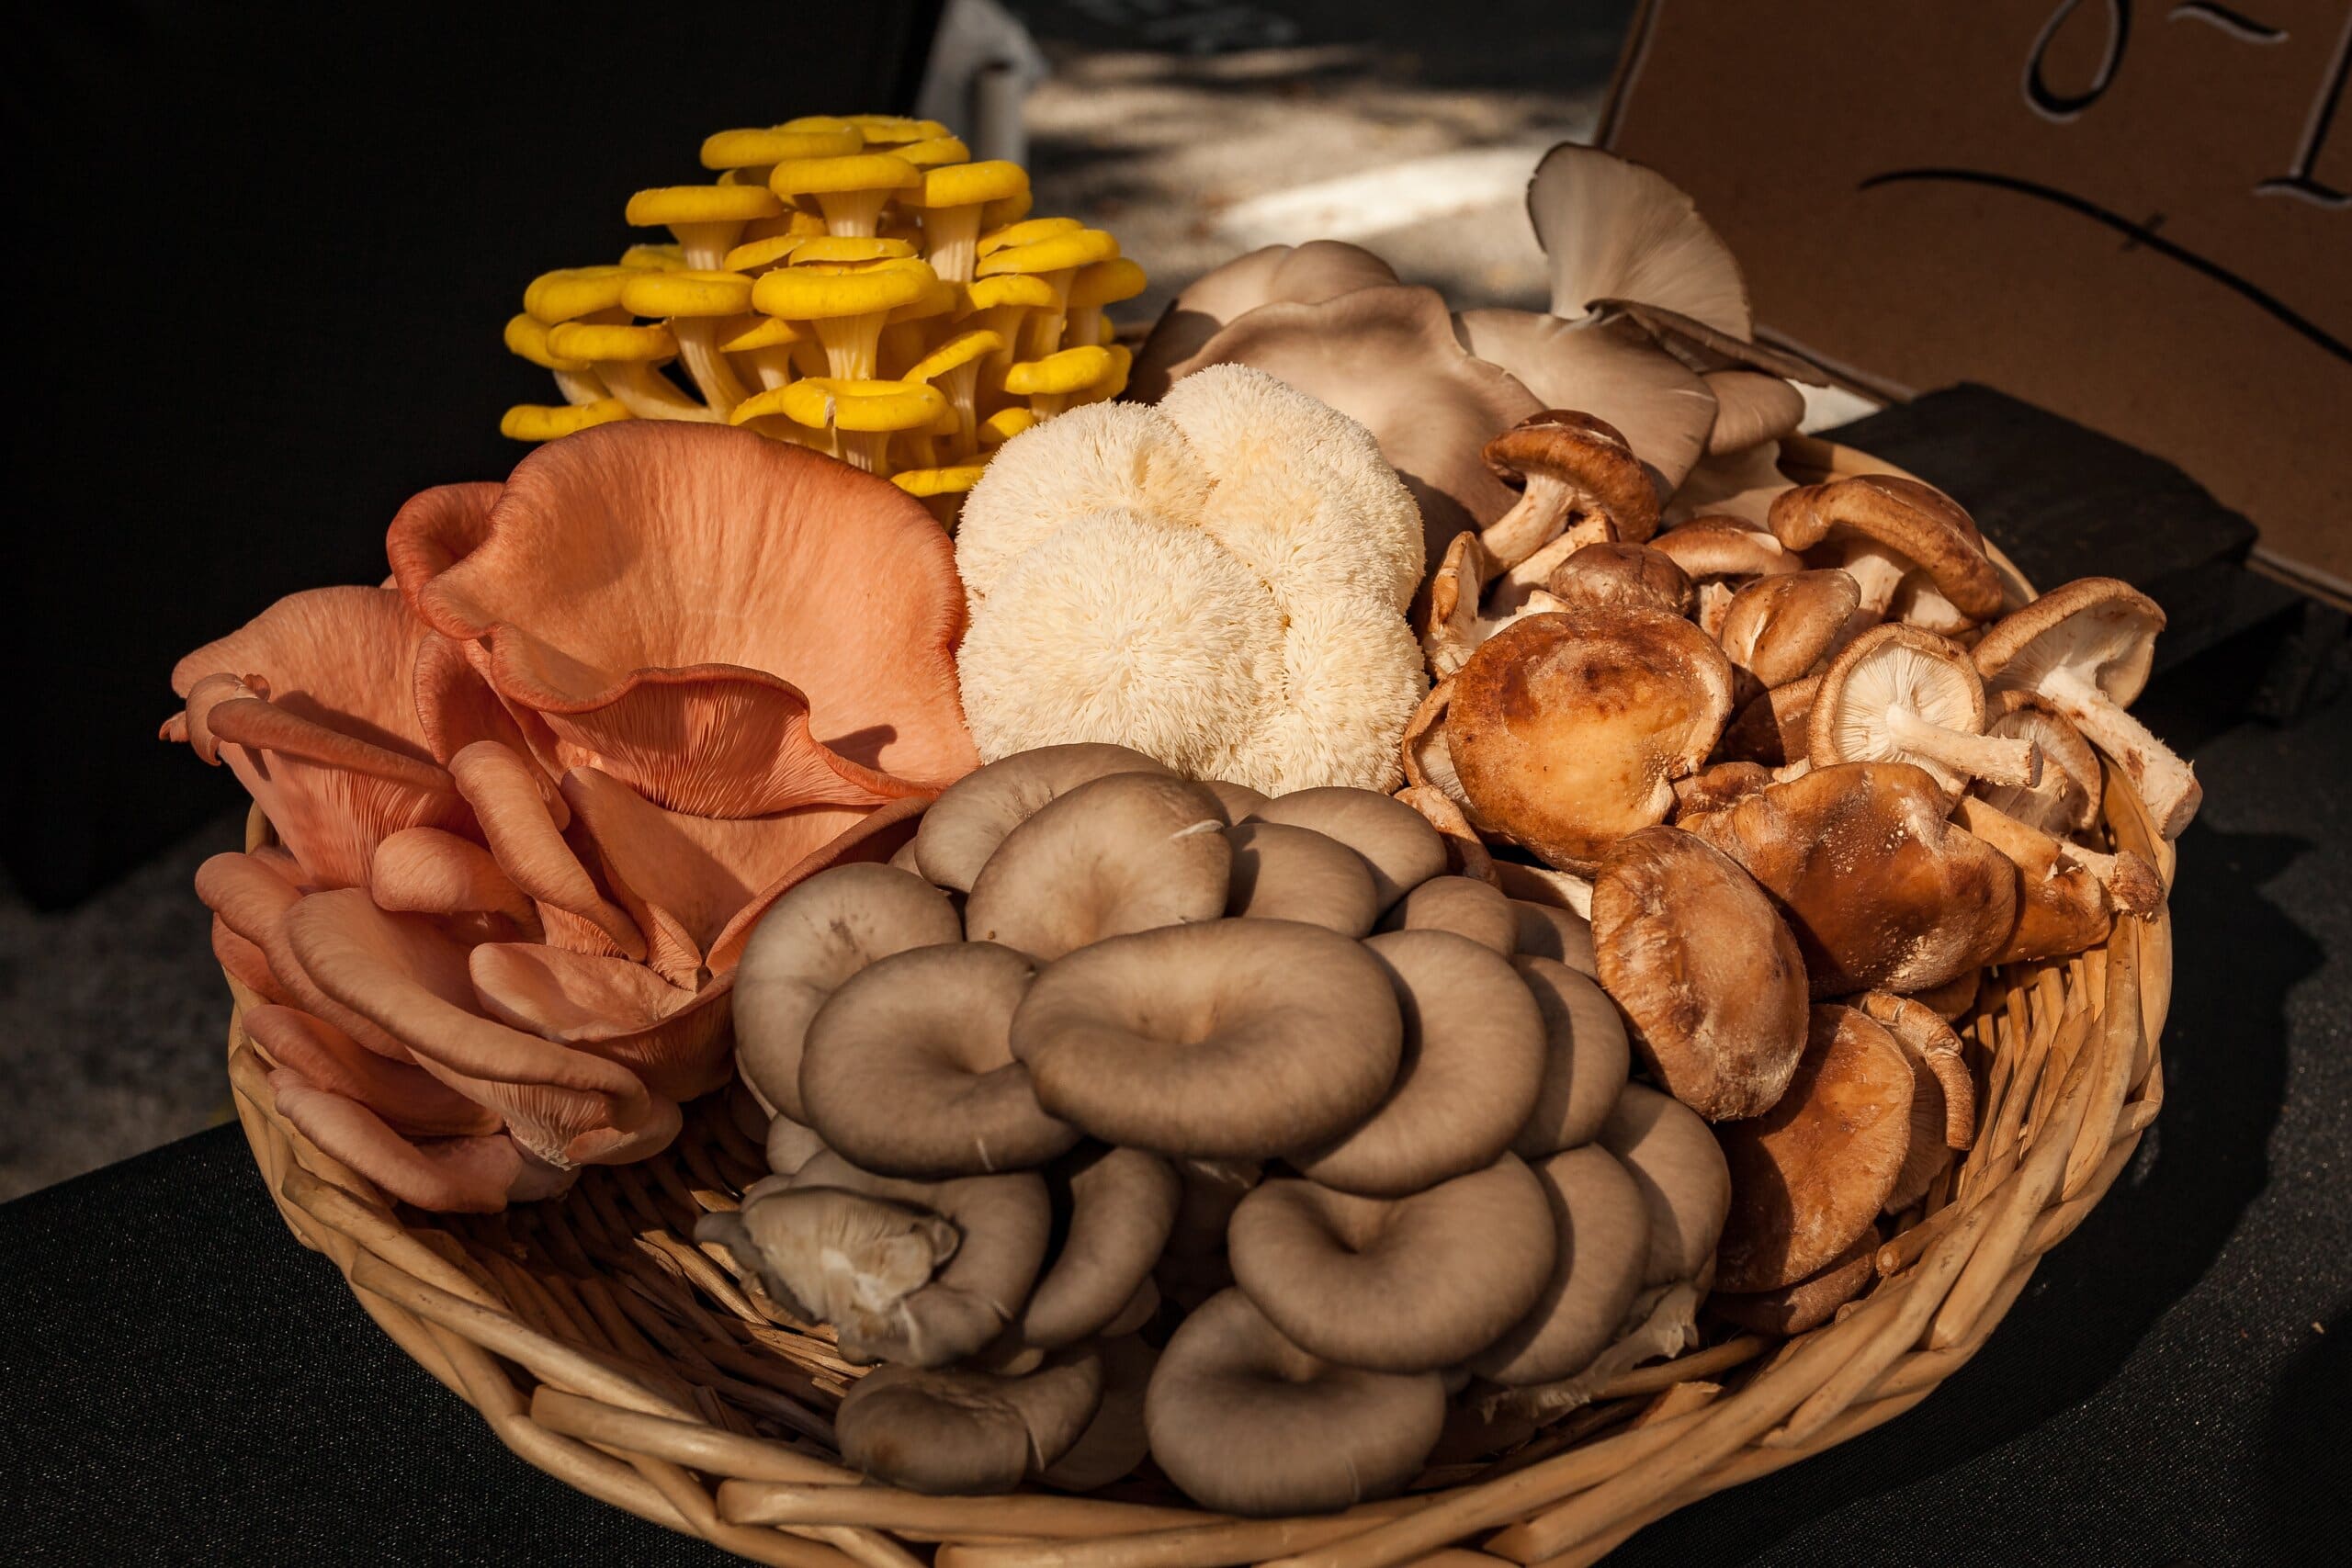 A basket with an assortment of mushrooms, including lion's mane mushrooms.